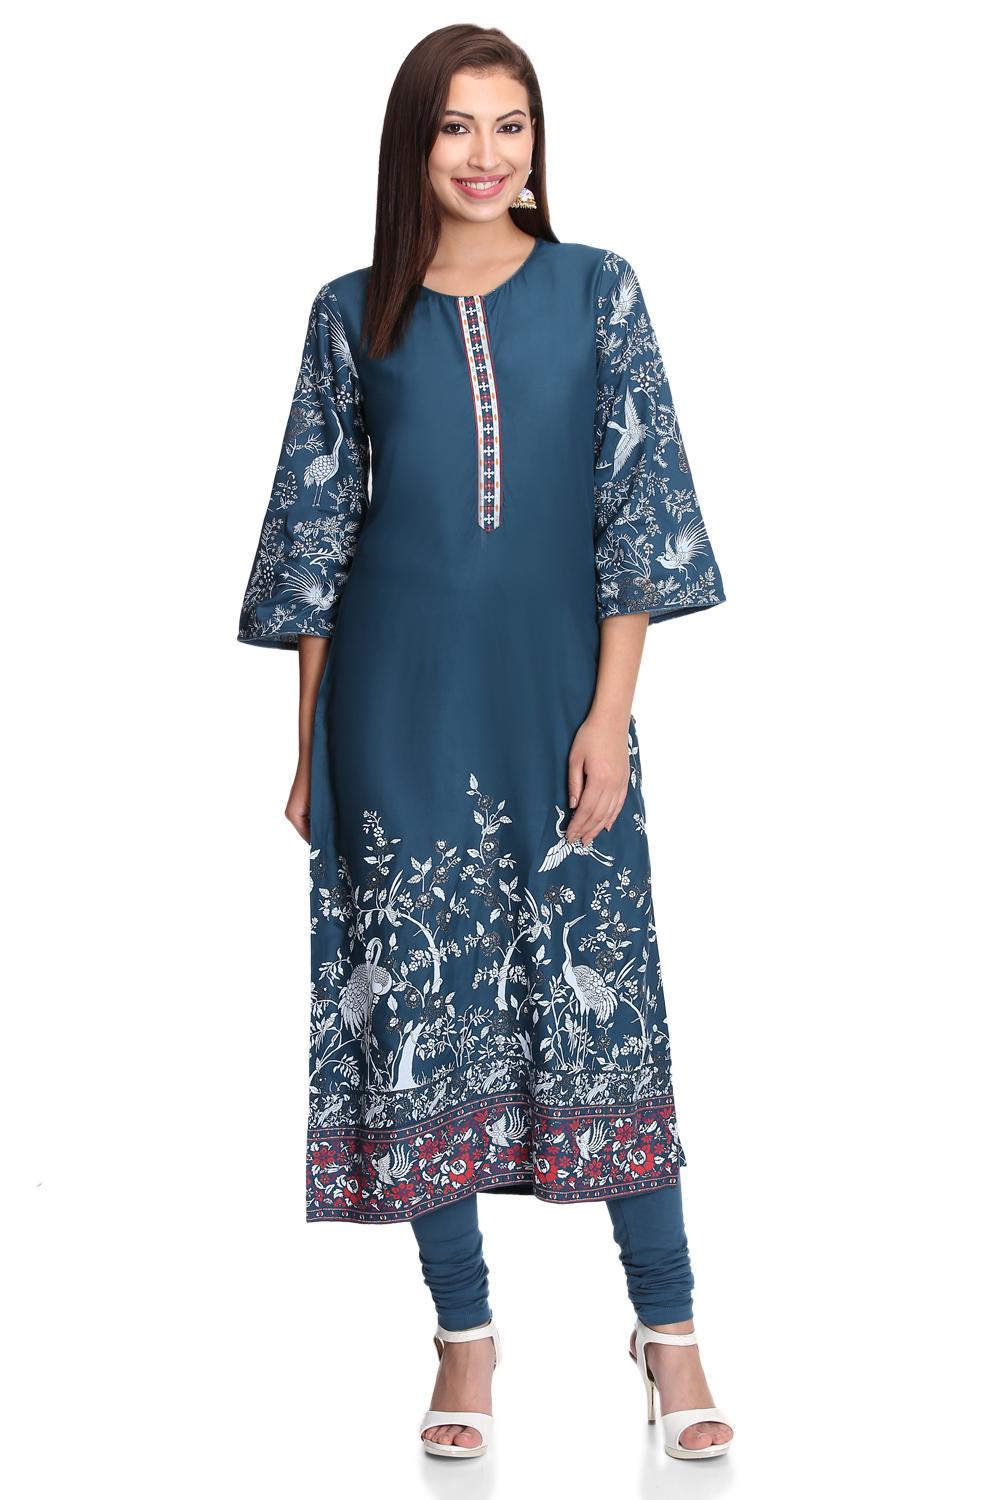 Buy Online Teal Viscose Straight Kurta for Women & Girls at Best Prices ...